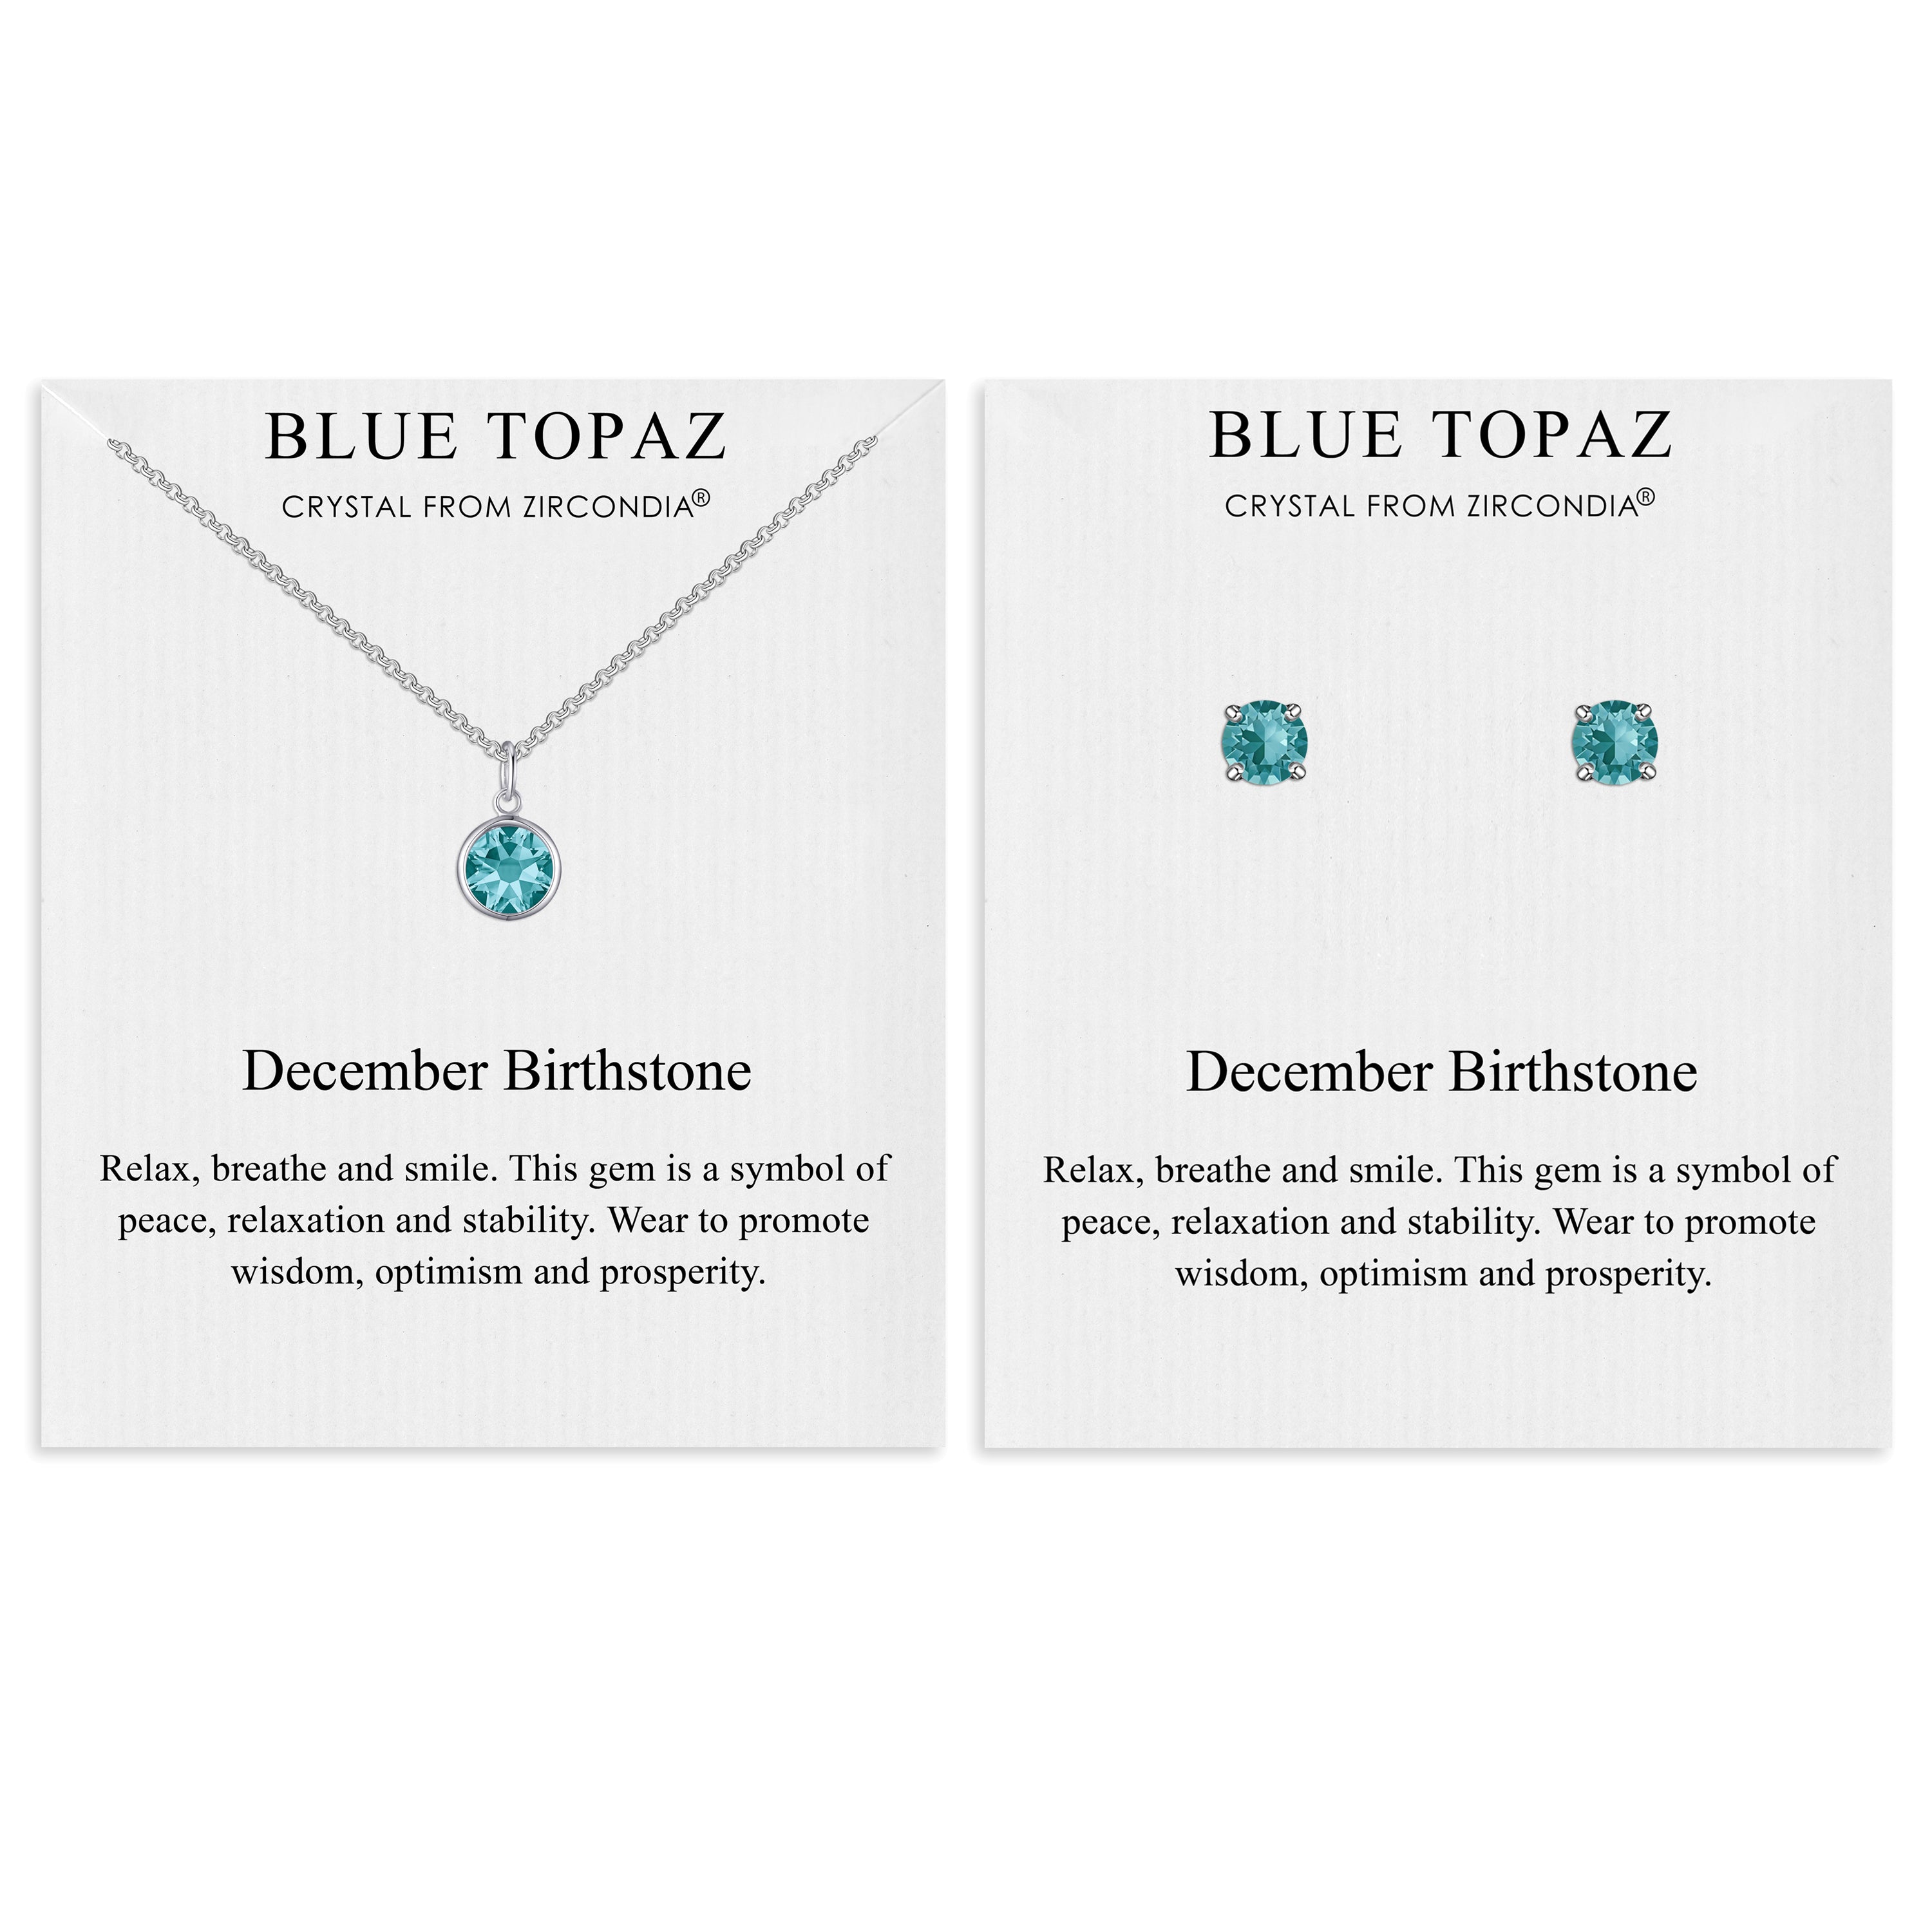 December (Blue Topaz) Birthstone Necklace & Earrings Set Created with Zircondia® Crystals by Philip Jones Jewellery